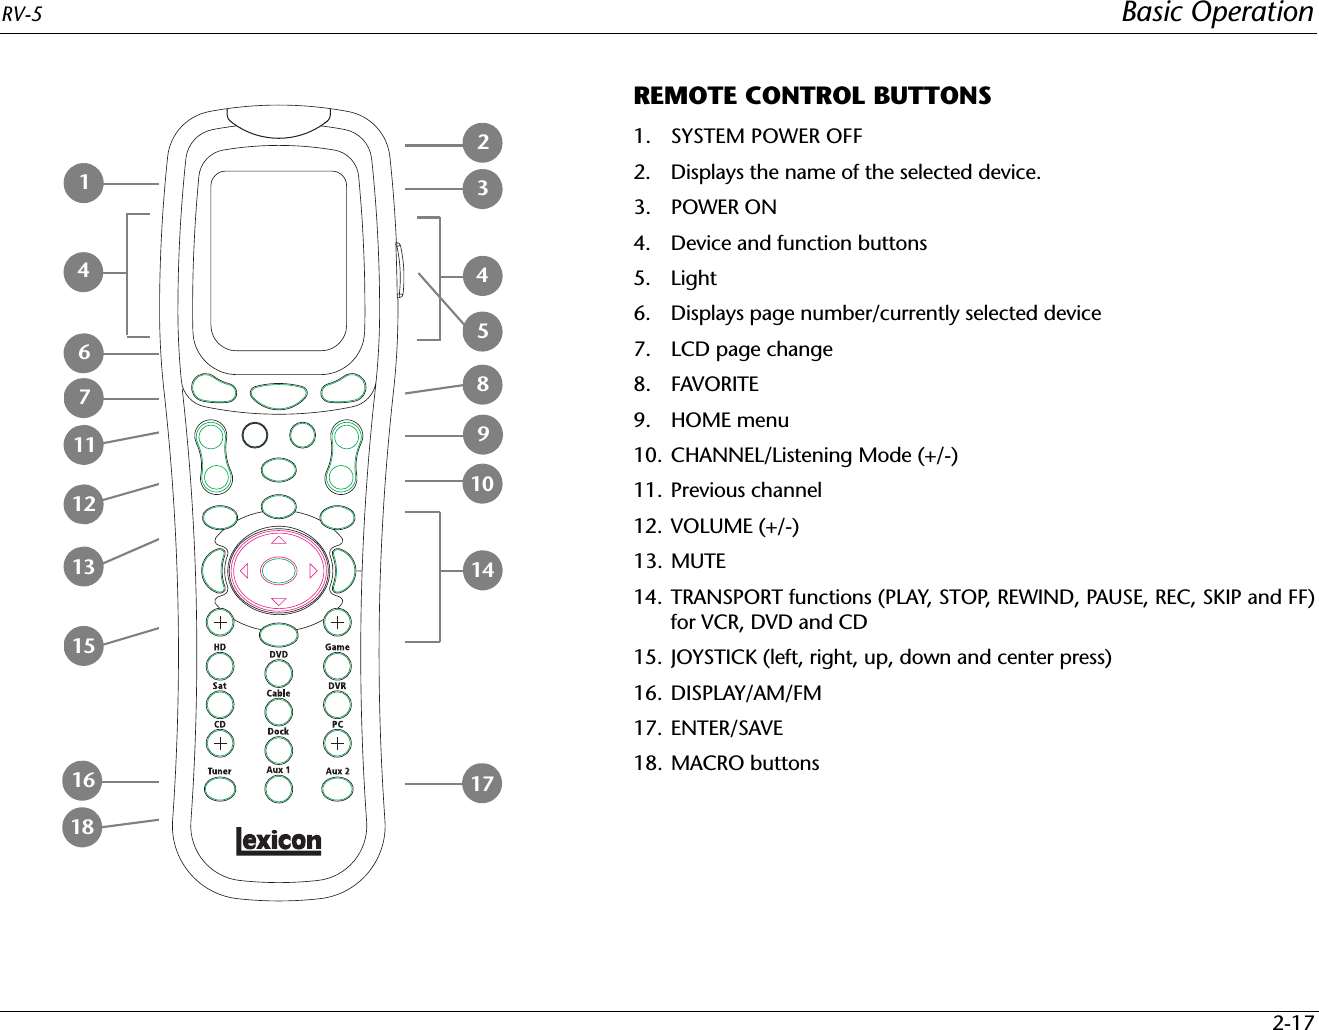 RV-5 Basic Operation2-17REMOTE CONTROL BUTTONS1. SYSTEM POWER OFF2. Displays the name of the selected device.3. POWER ON4. Device and function buttons5. Light6. Displays page number/currently selected device7. LCD page change8. FAVORITE9. HOME menu10. CHANNEL/Listening Mode (+/-)11. Previous channel12. VOLUME (+/-)13. MUTE14. TRANSPORT functions (PLAY, STOP, REWIND, PAUSE, REC, SKIP and FF)for VCR, DVD and CD15. JOYSTICK (left, right, up, down and center press)16. DISPLAY/AM/FM17. ENTER/SAVE18. MACRO buttons3145181615131267112489101417